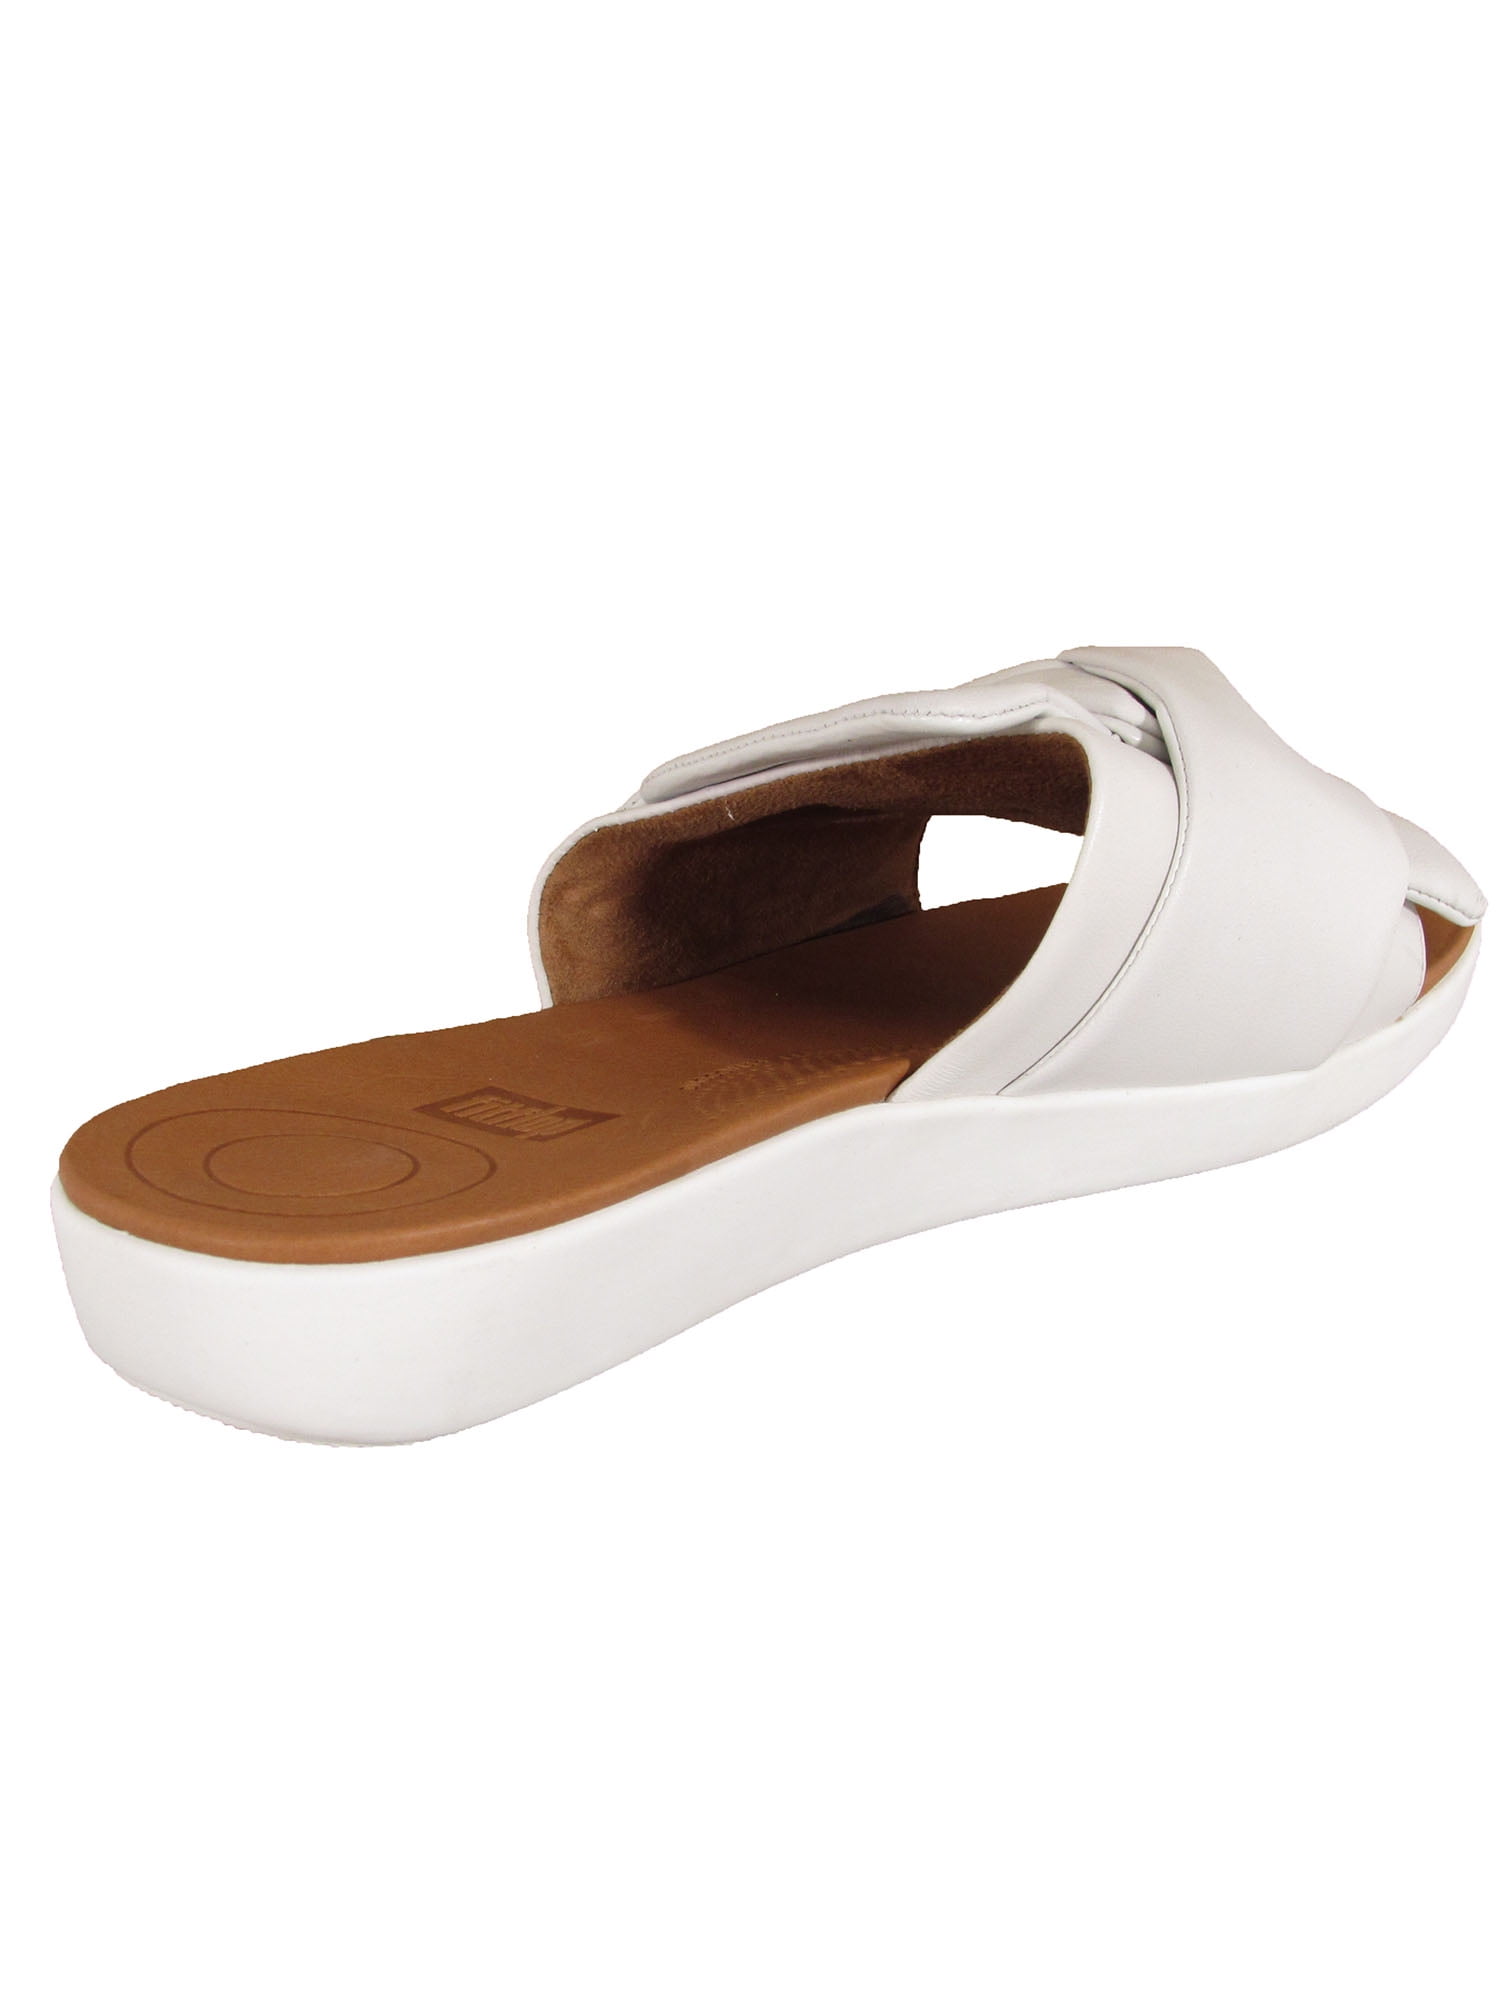 fitflop bowy